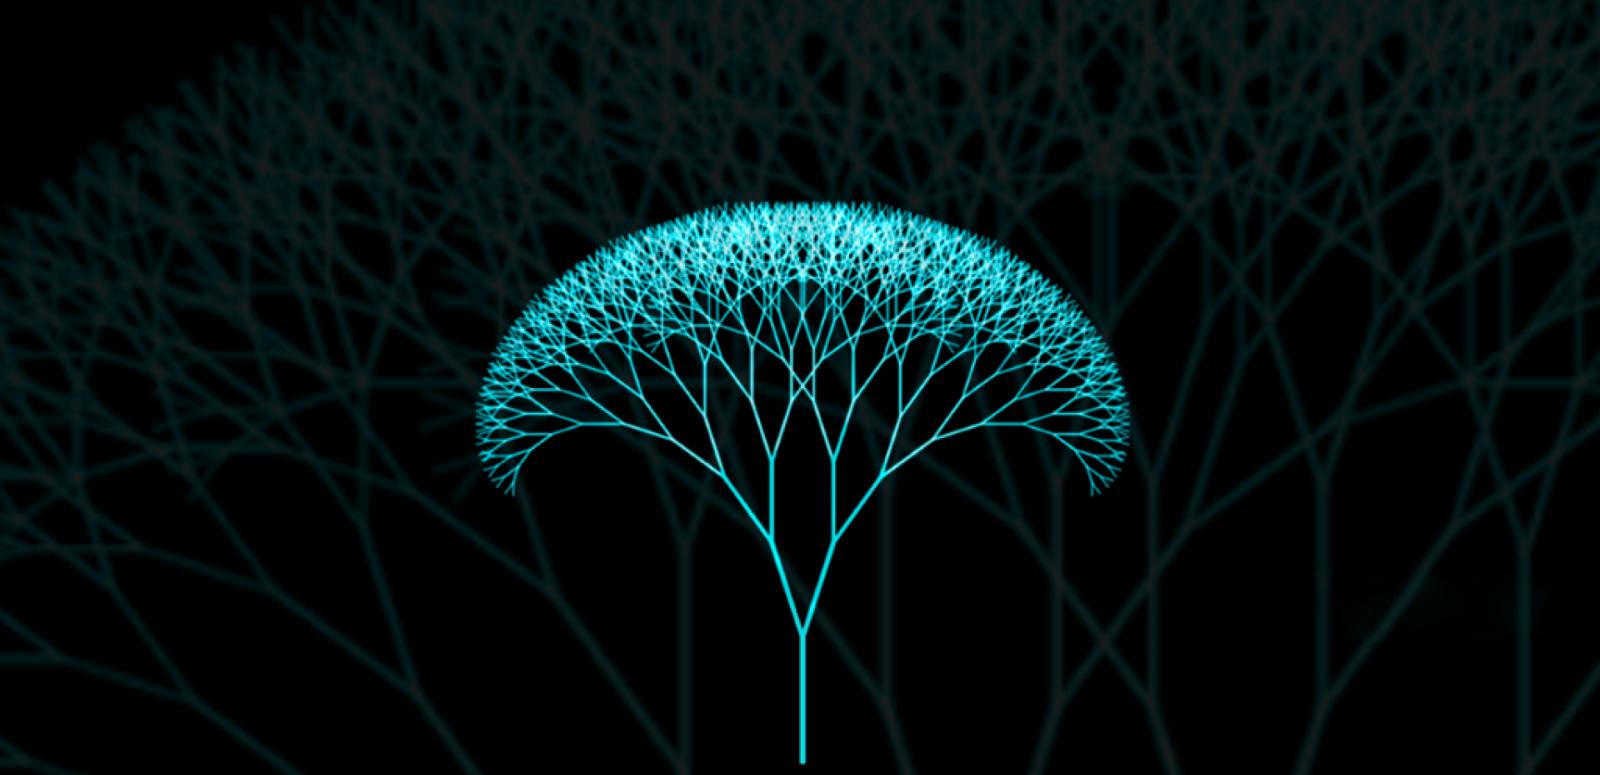 The Fantastic Futures conference logo featuring a green tree with branches lifting upwards and outwards against a black background